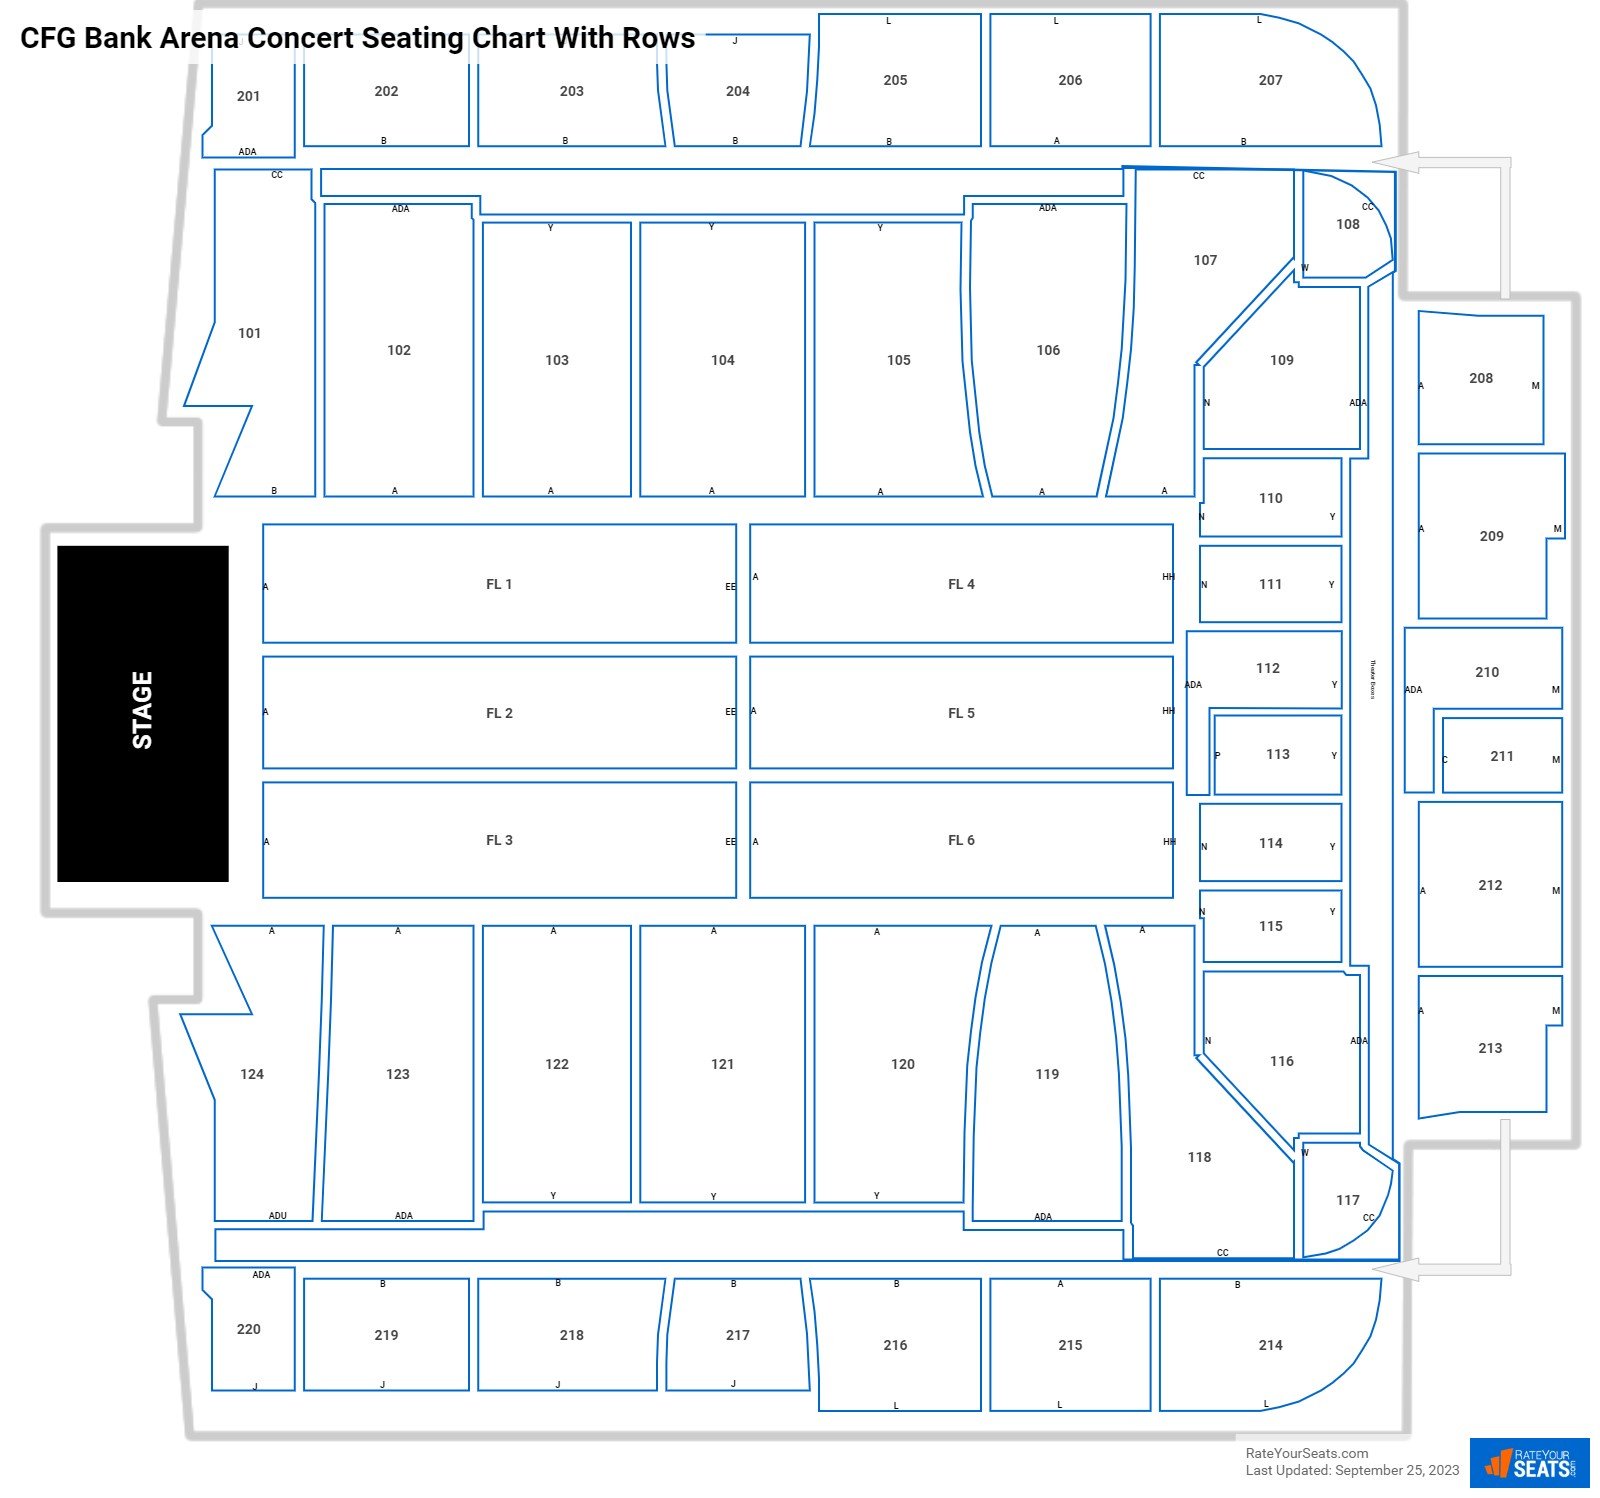 CFG Bank Arena seating chart with row numbers